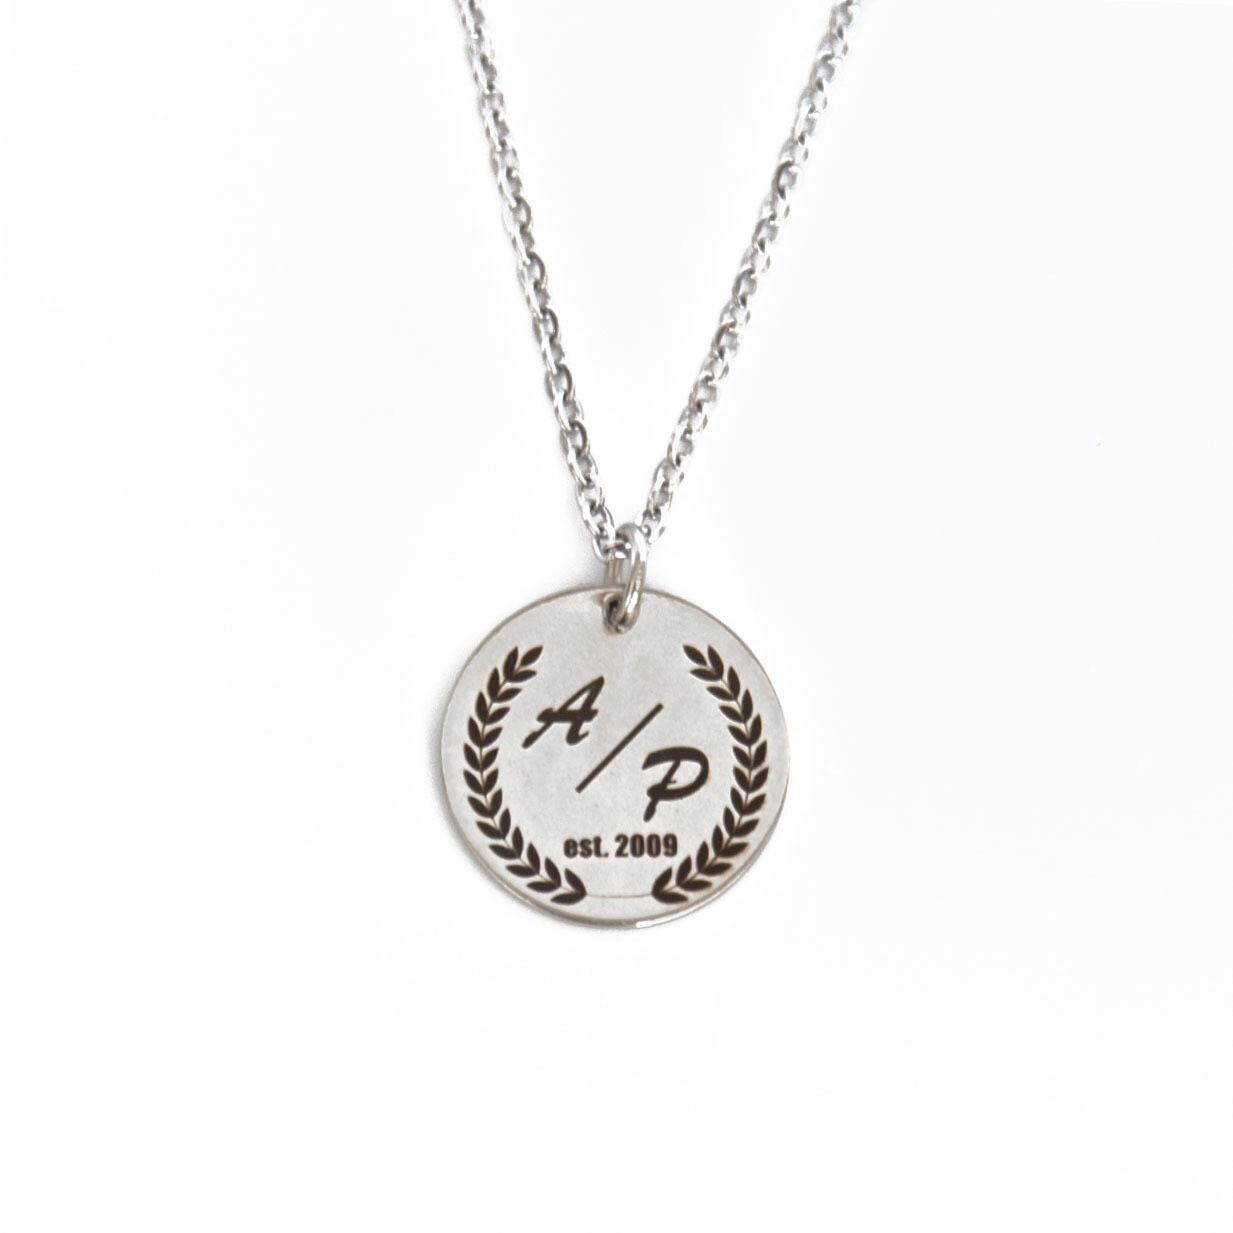 Personalised Engraved Monogram and year Necklace